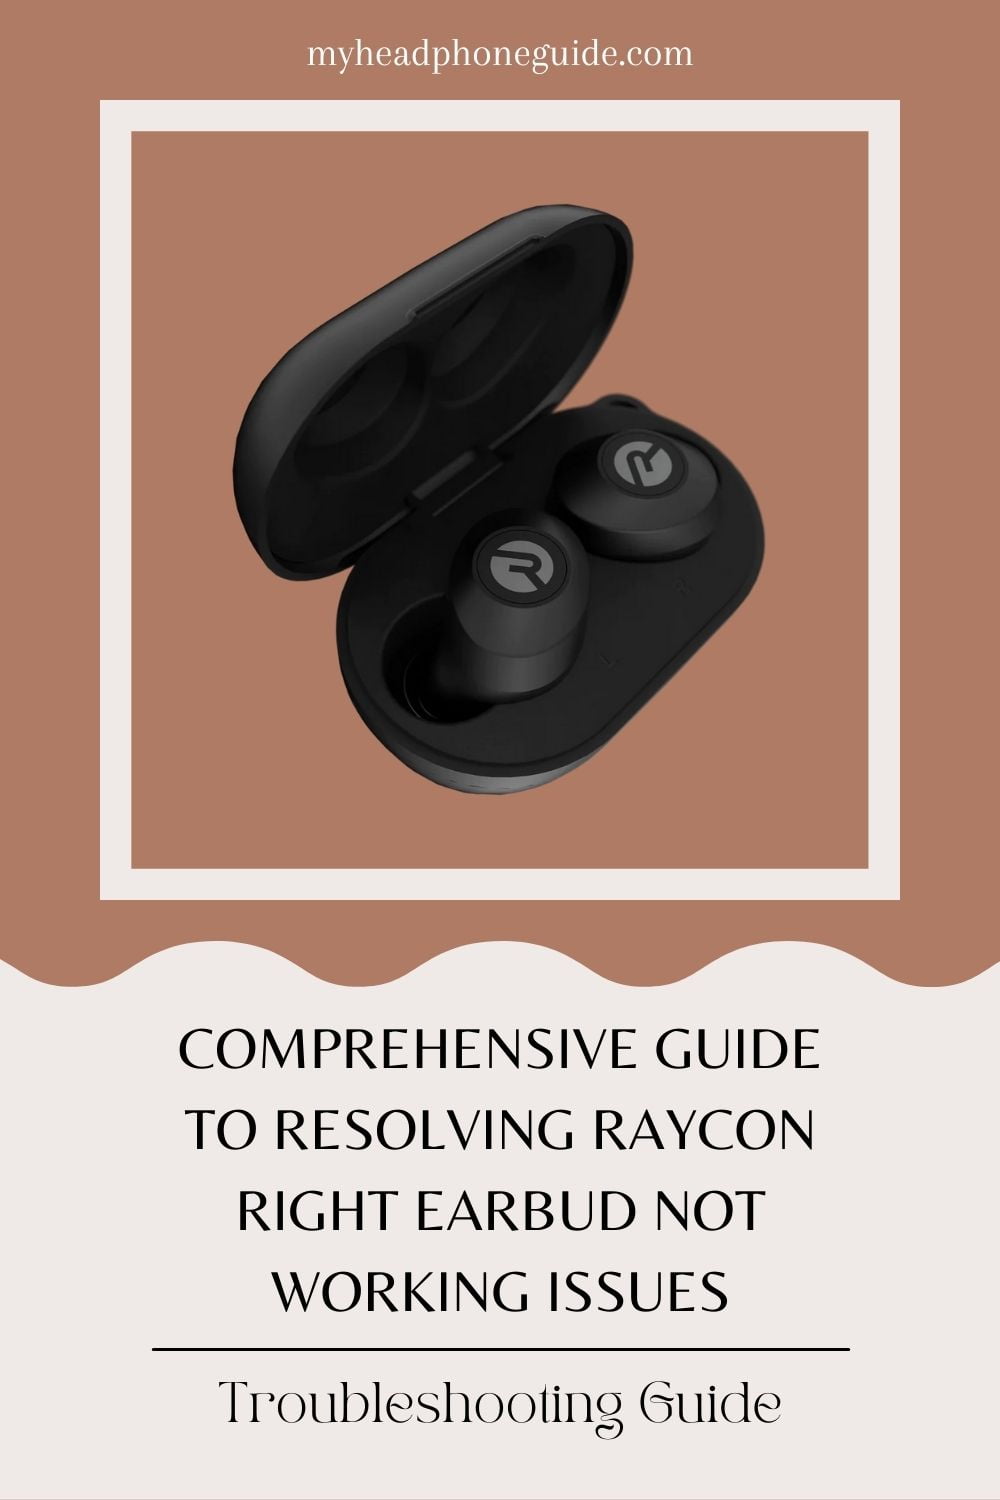 How to Resolve Raycon Right Earbud Not Working Issues